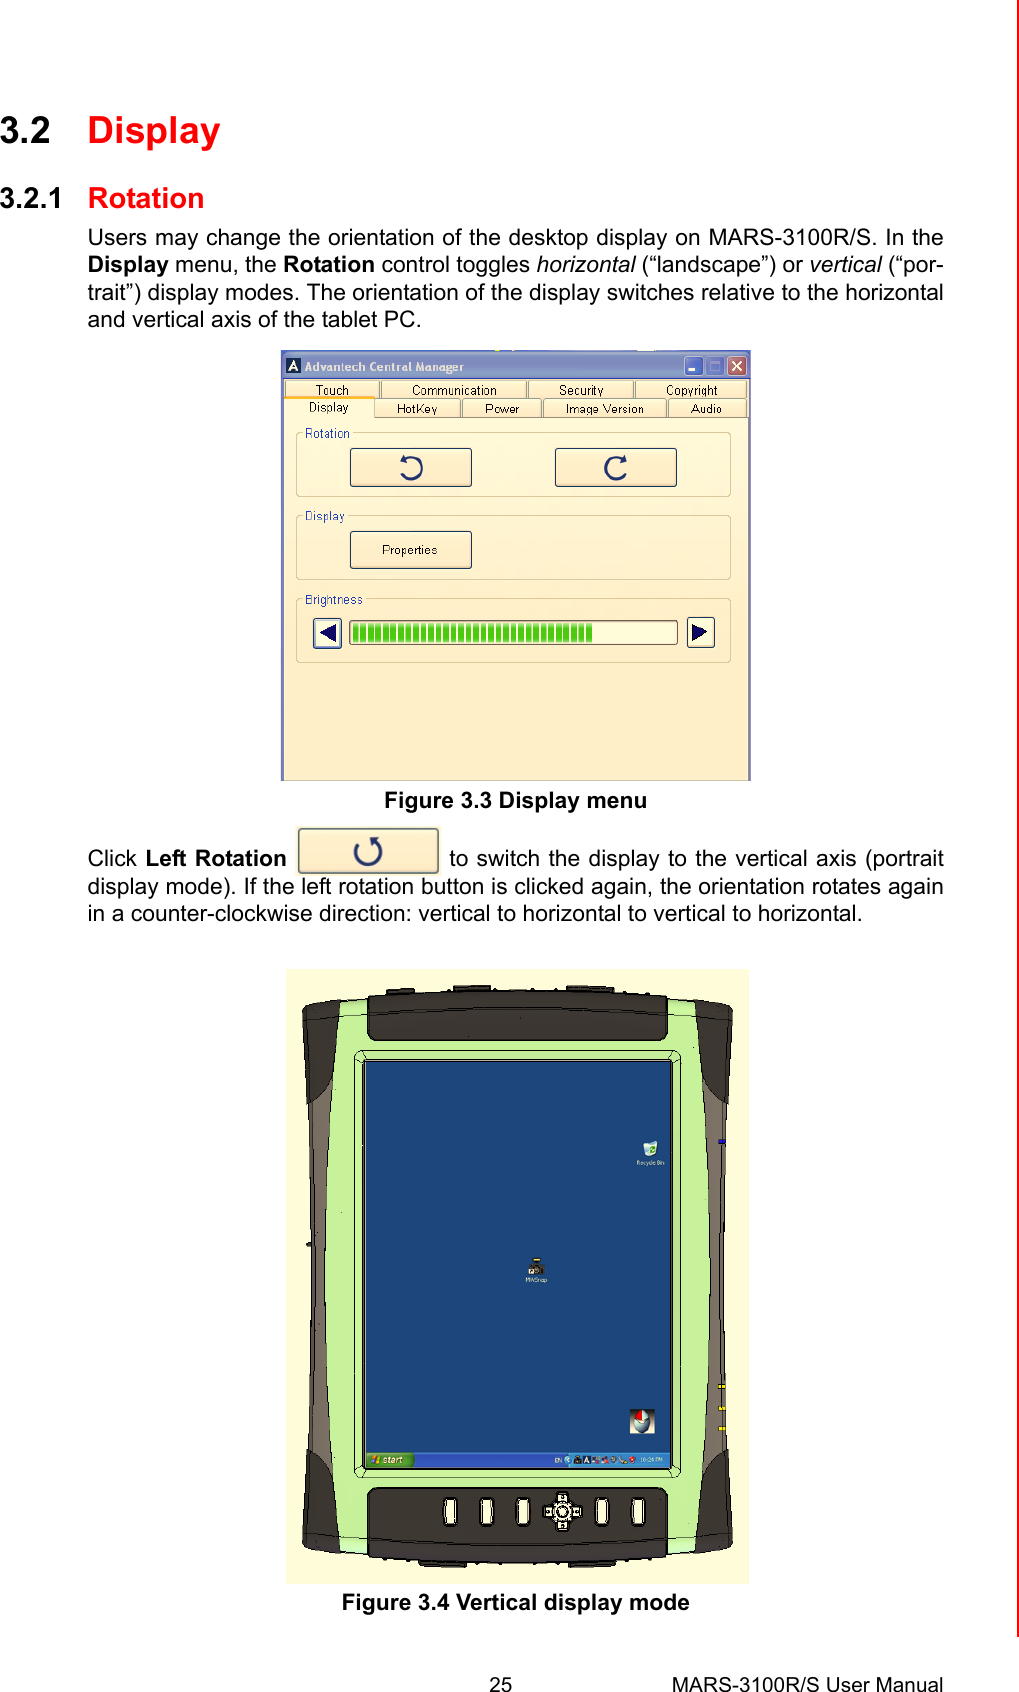 25 MARS-3100R/S User ManualChapter 3 Advantech Central Manager3.2 Display3.2.1 RotationUsers may change the orientation of the desktop display on MARS-3100R/S. In theDisplay menu, the Rotation control toggles horizontal (“landscape”) or vertical (“por-trait”) display modes. The orientation of the display switches relative to the horizontaland vertical axis of the tablet PC. Figure 3.3 Display menuClick Left Rotation   to switch the display to the vertical axis (portraitdisplay mode). If the left rotation button is clicked again, the orientation rotates againin a counter-clockwise direction: vertical to horizontal to vertical to horizontal.Figure 3.4 Vertical display mode